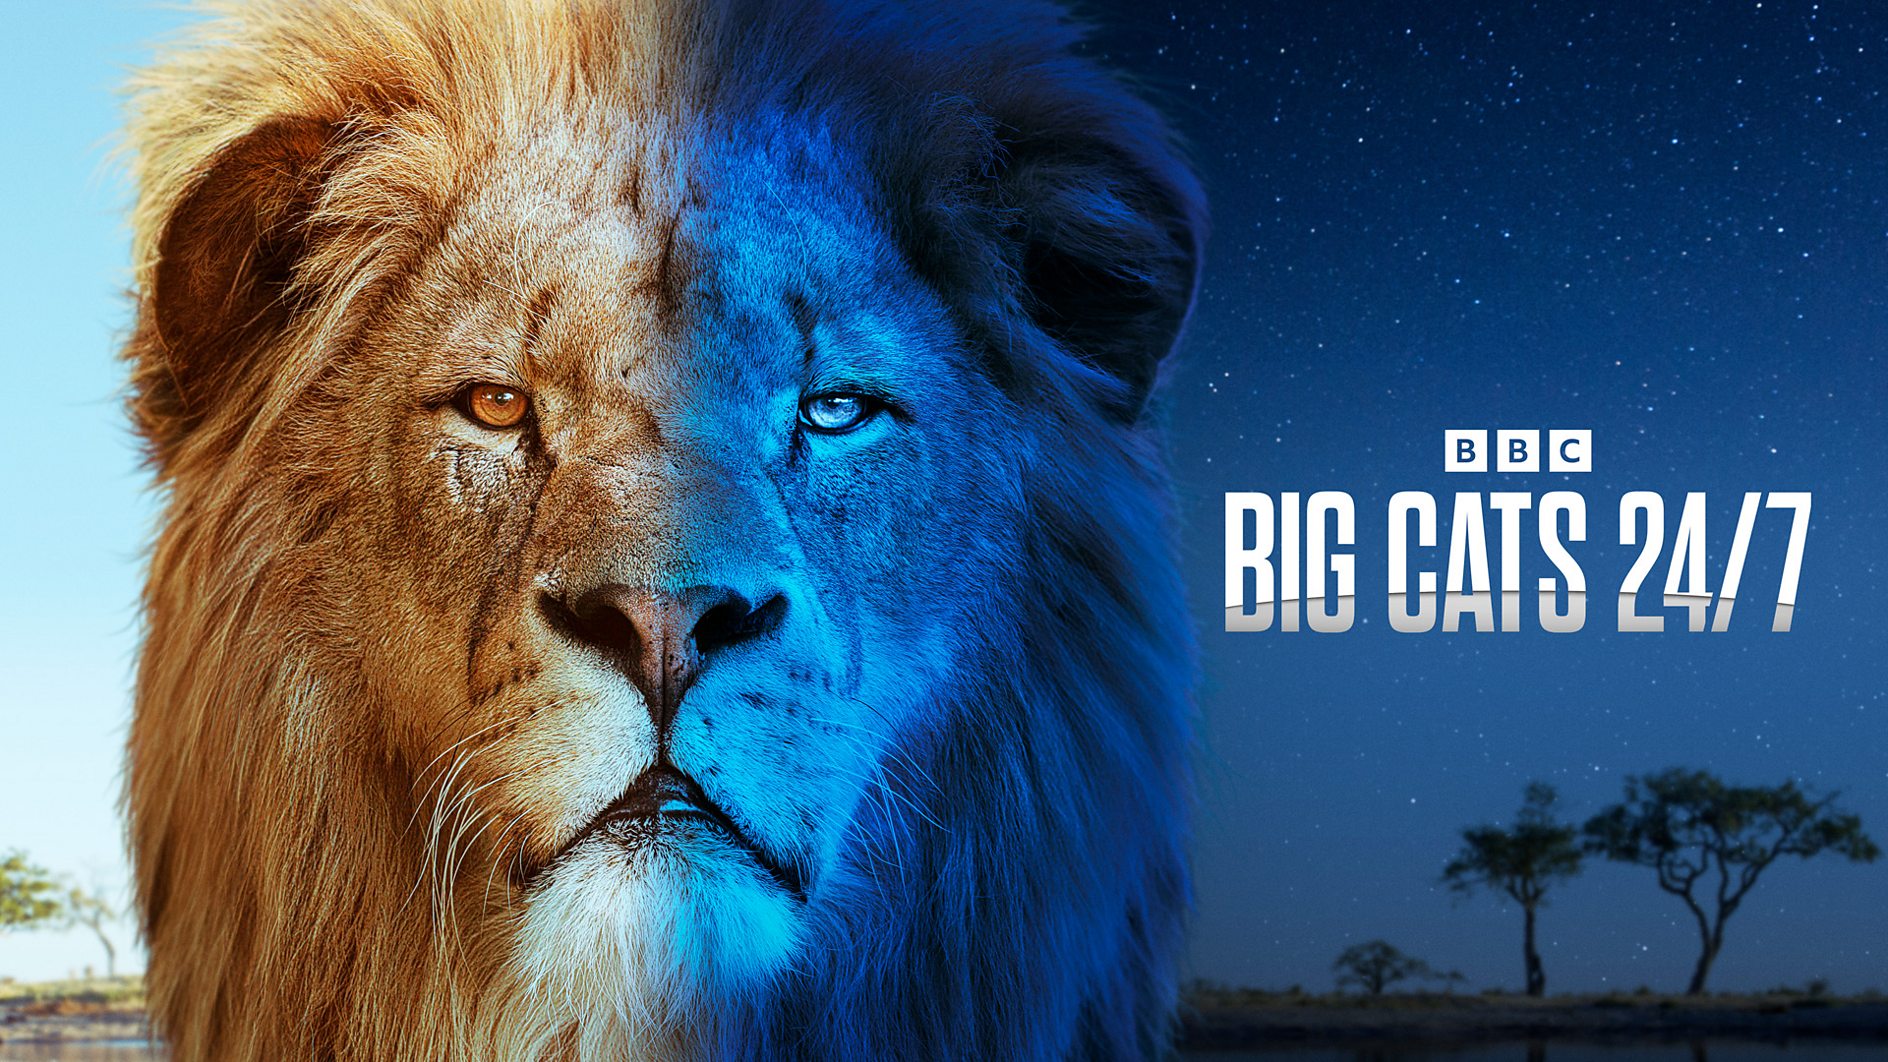 BBC Studios announces series two commission of Big Cats 24/7 ahead of series one debut